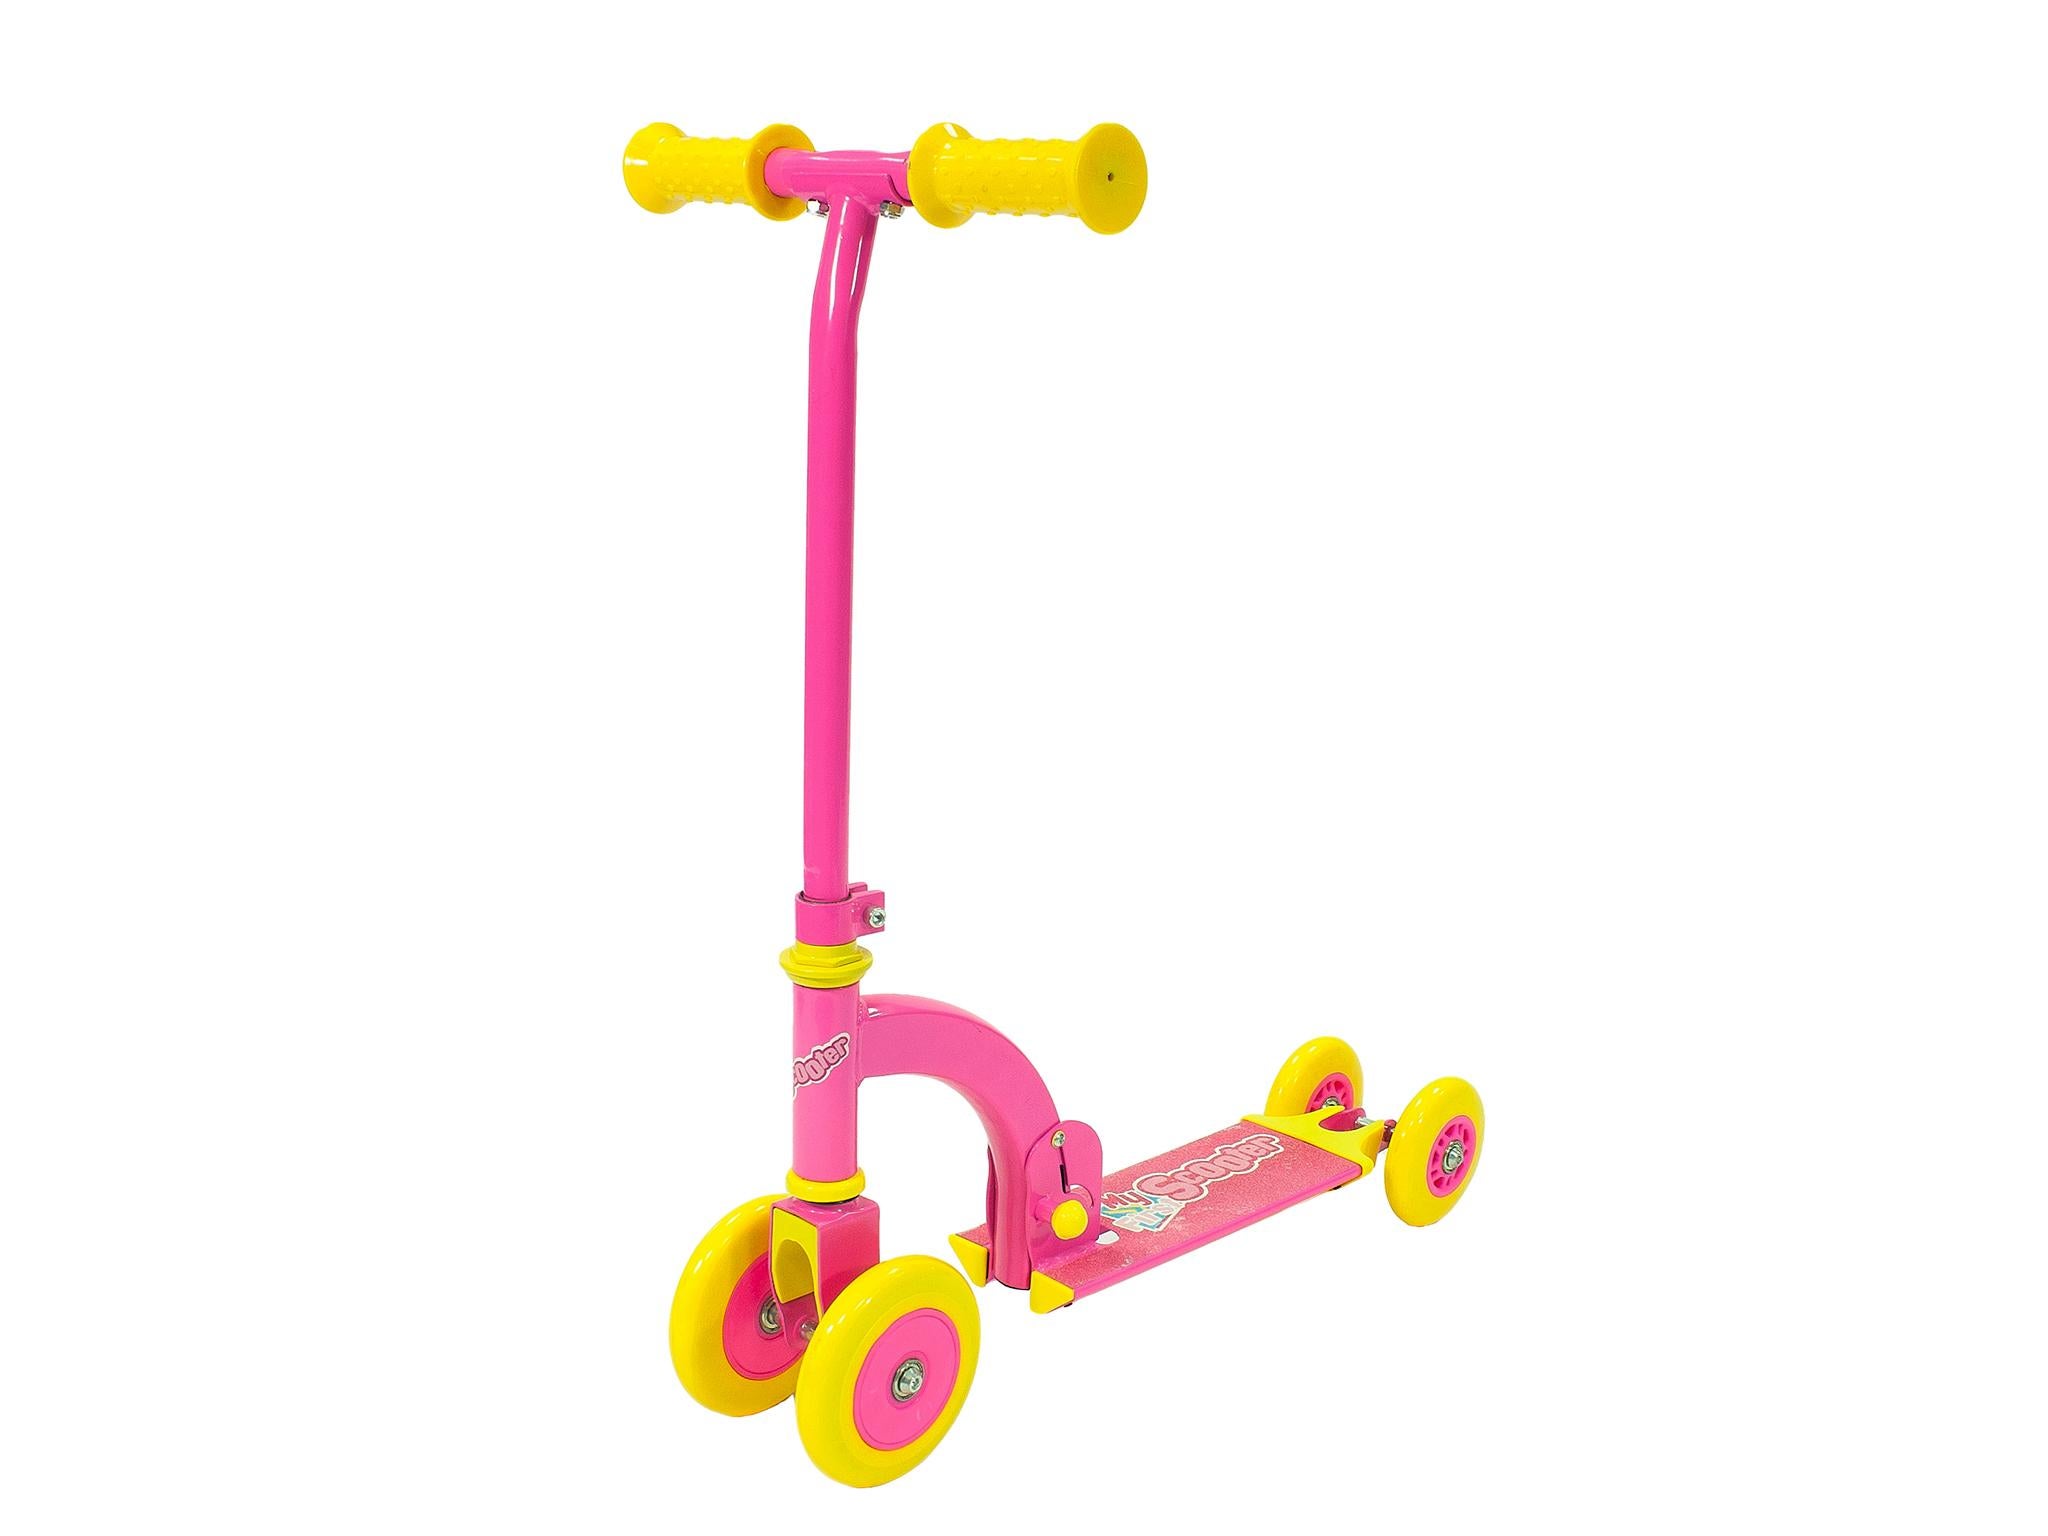 For little ones new to scooting, this colourful style is safe and easy to learn on (Amazon)